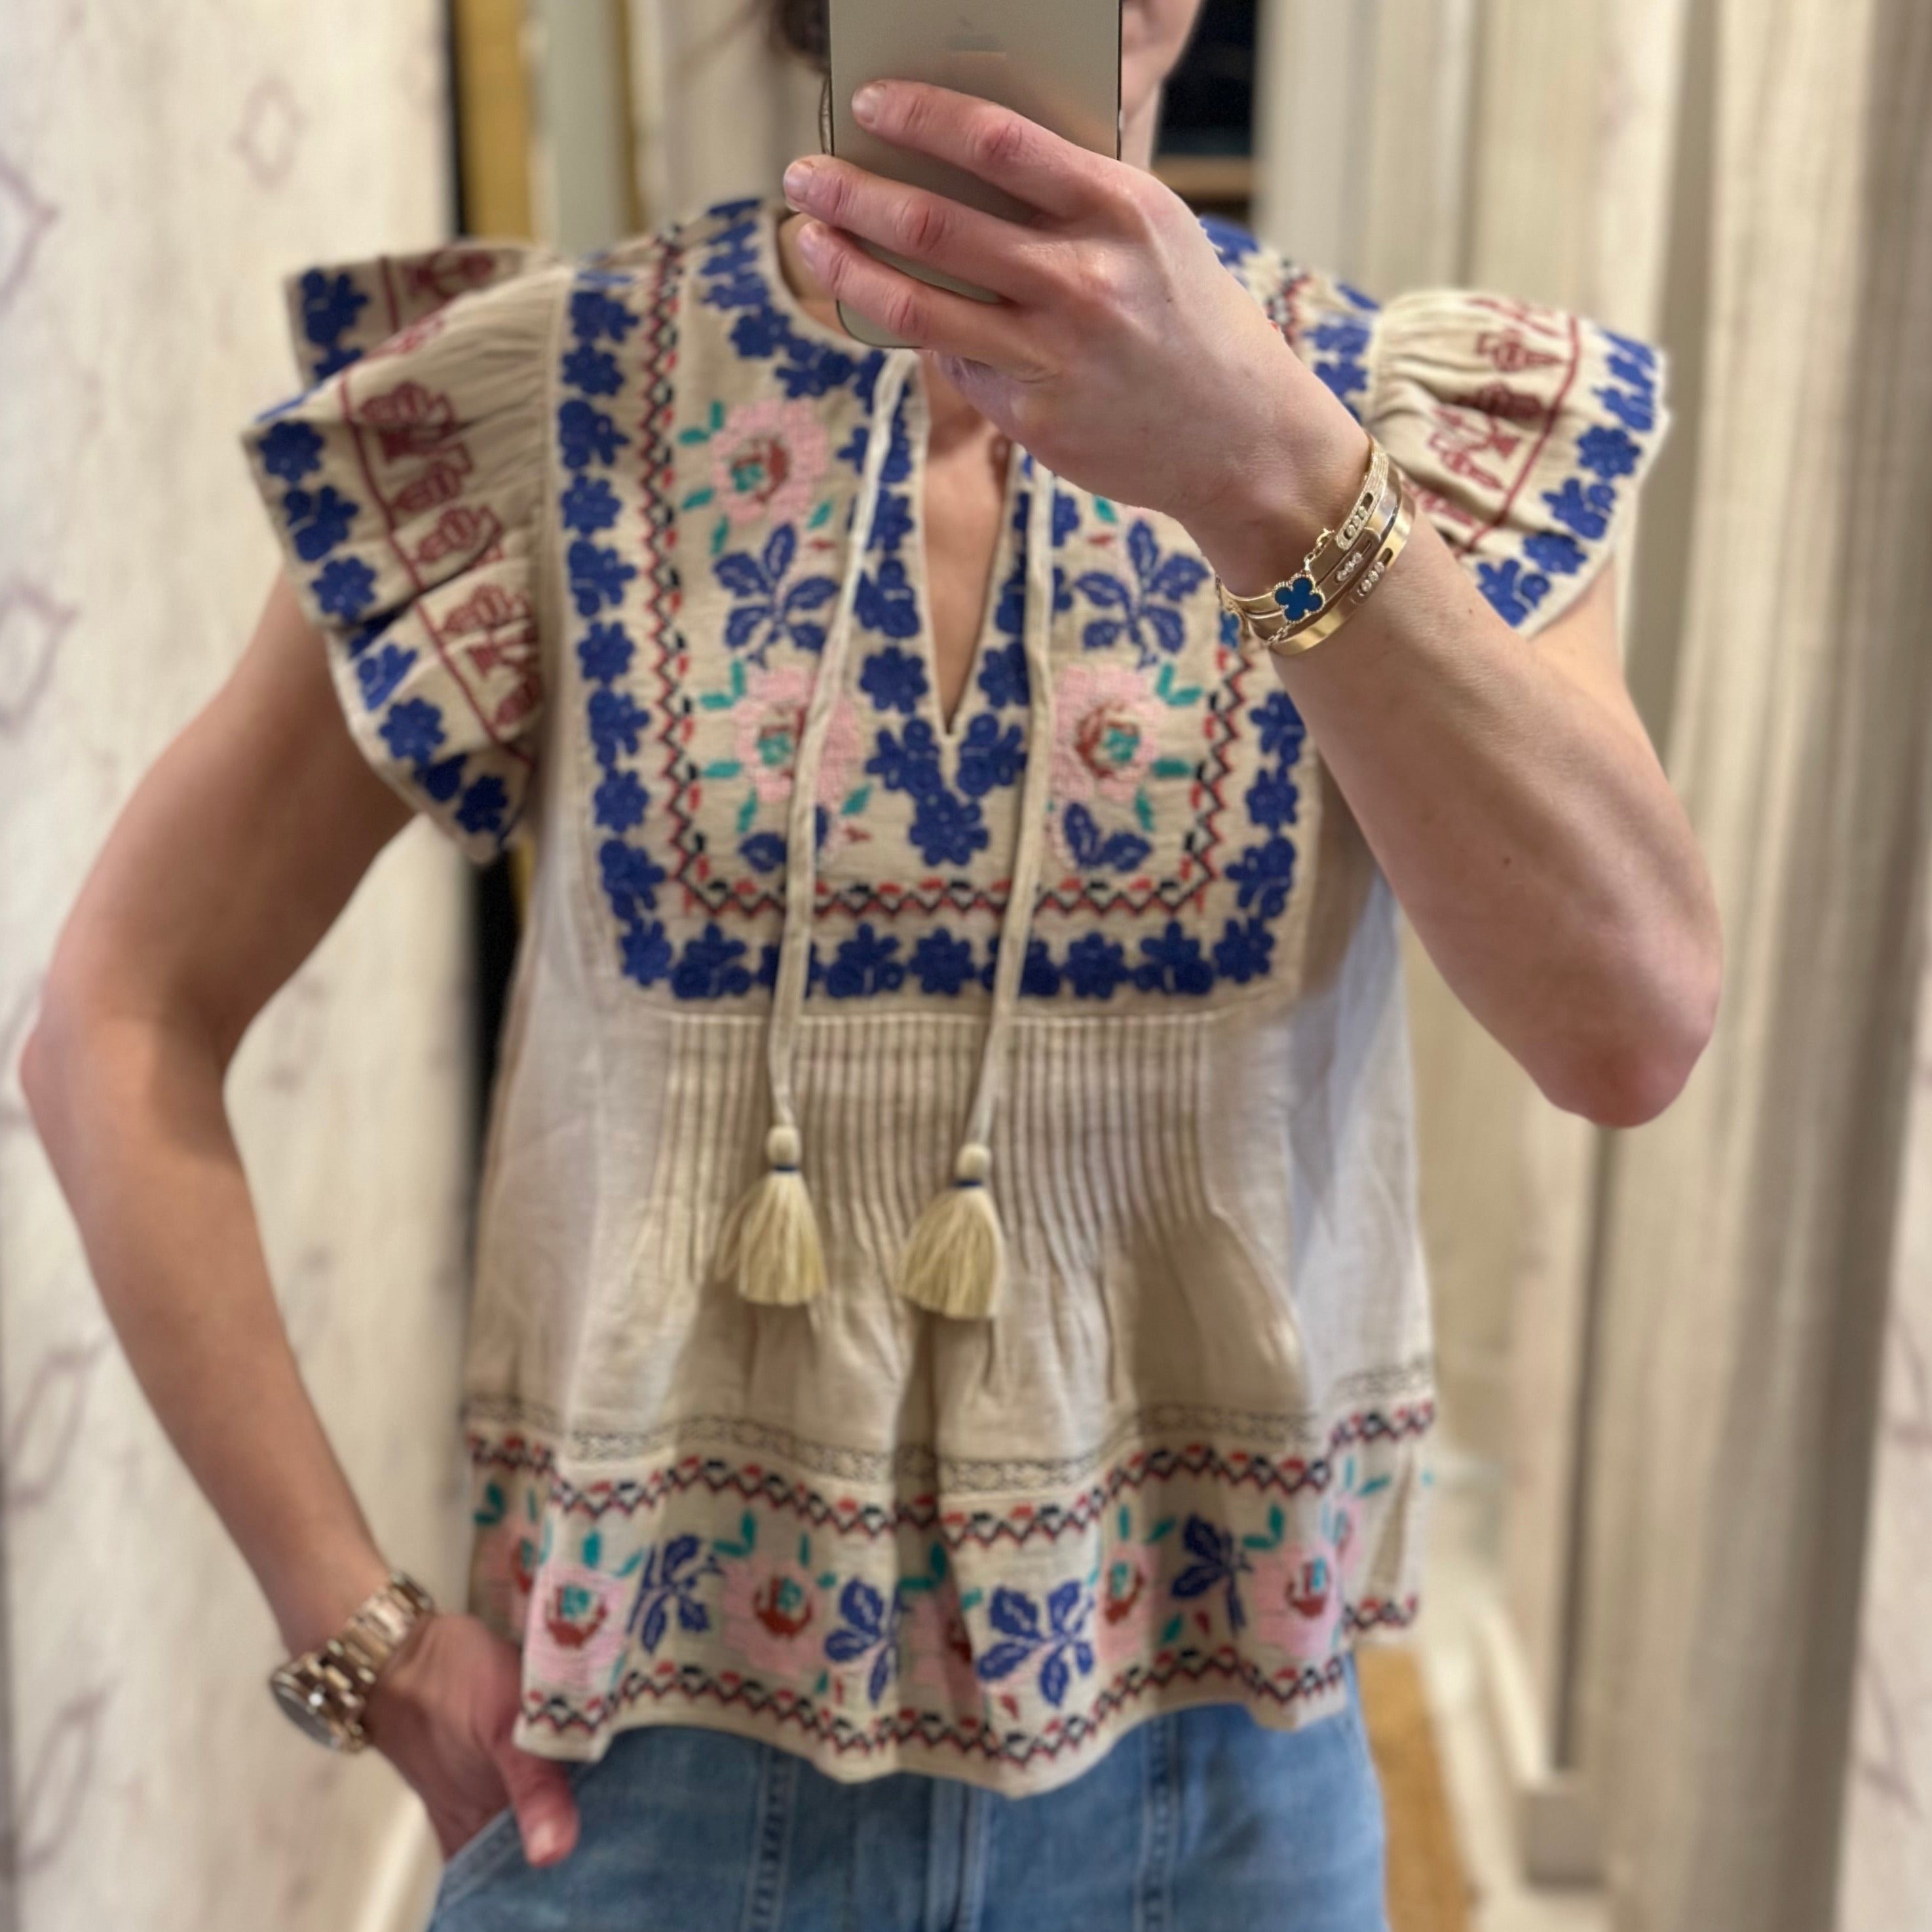 Ramona Embroidery Flutter Slv Top